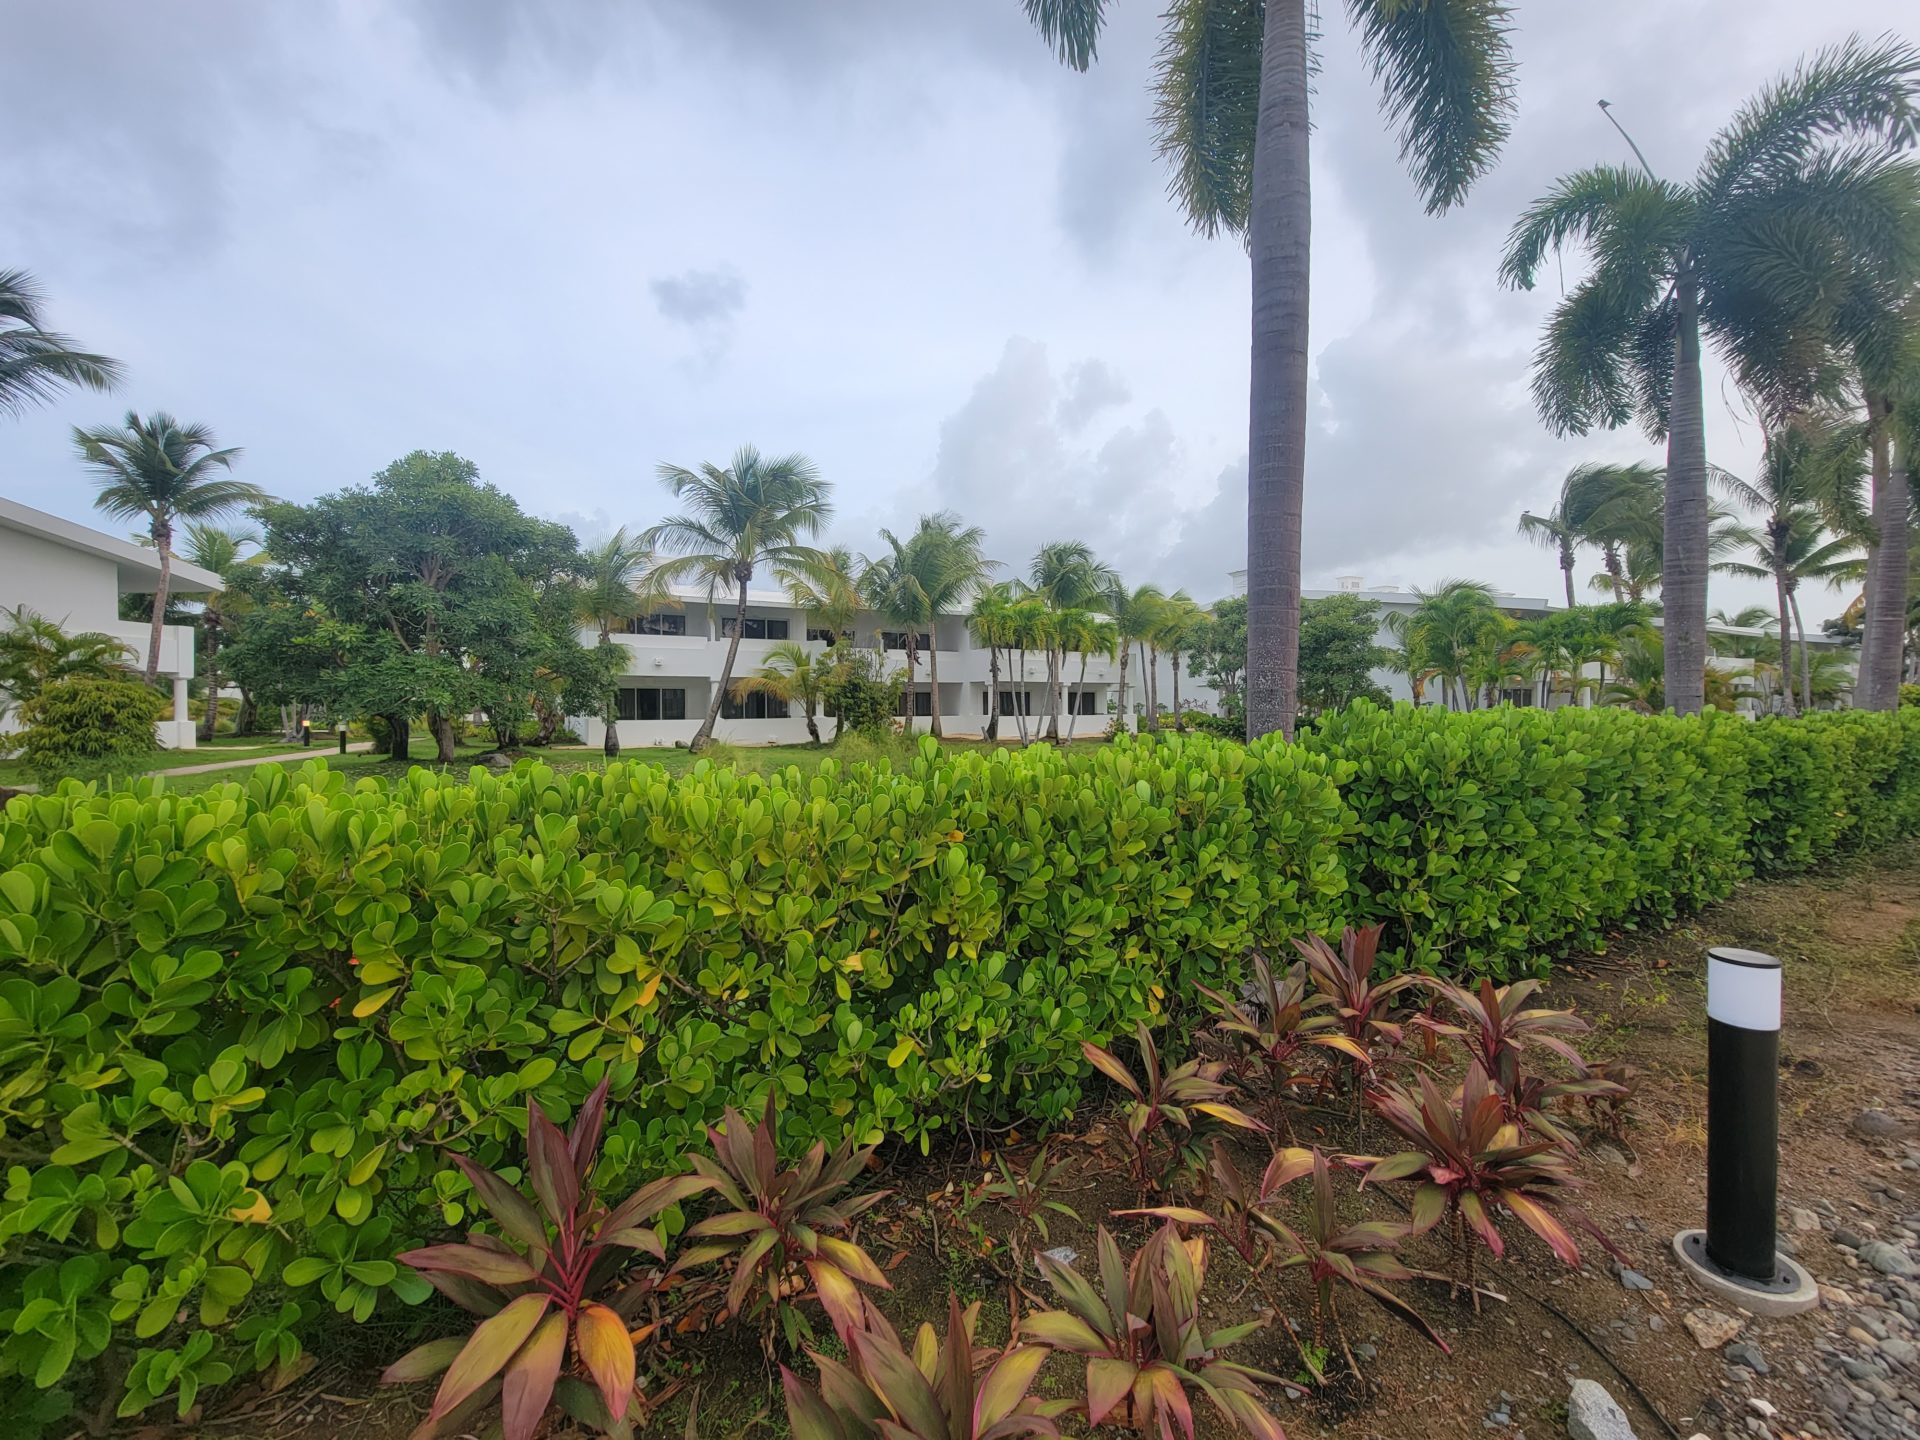 a row of bushes and palm trees